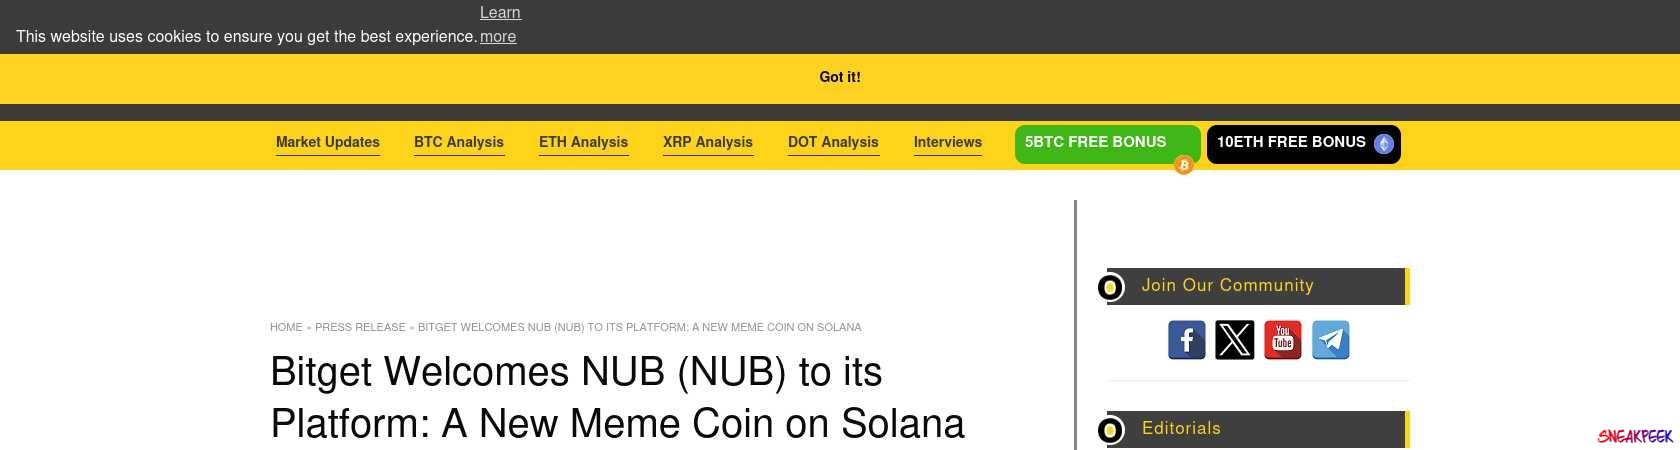 Read the full Article:  ⭲ Bitget Welcomes NUB (NUB) to its Platform: A New Meme Coin on Solana